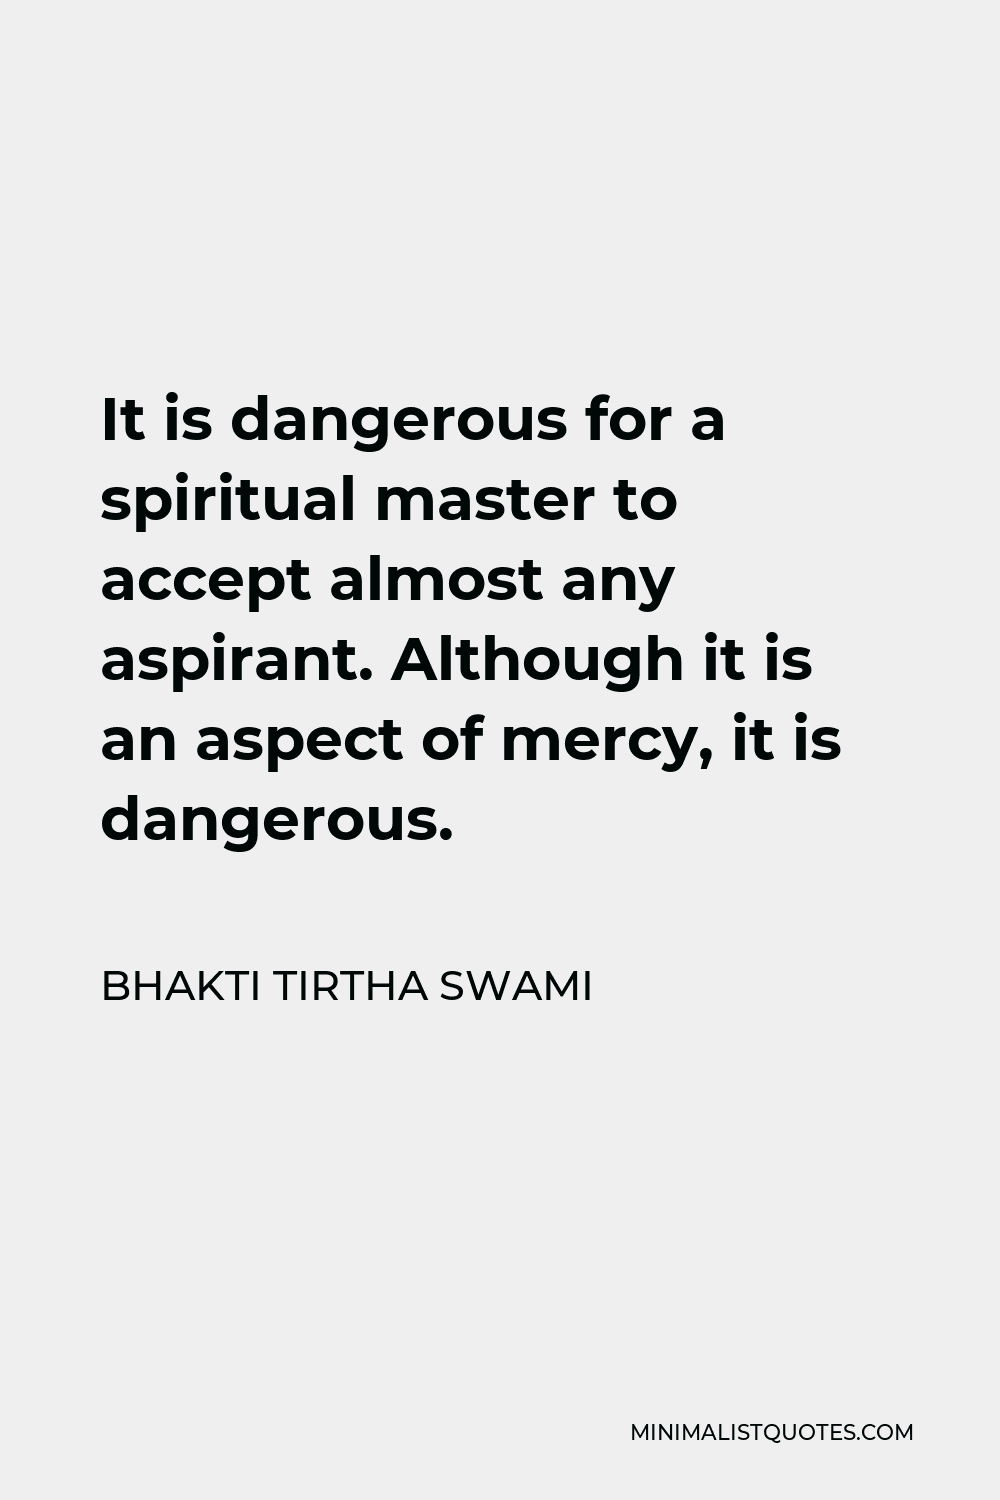 Bhakti Tirtha Swami Quote - It is dangerous for a spiritual master to accept almost any aspirant. Although it is an aspect of mercy, it is dangerous.